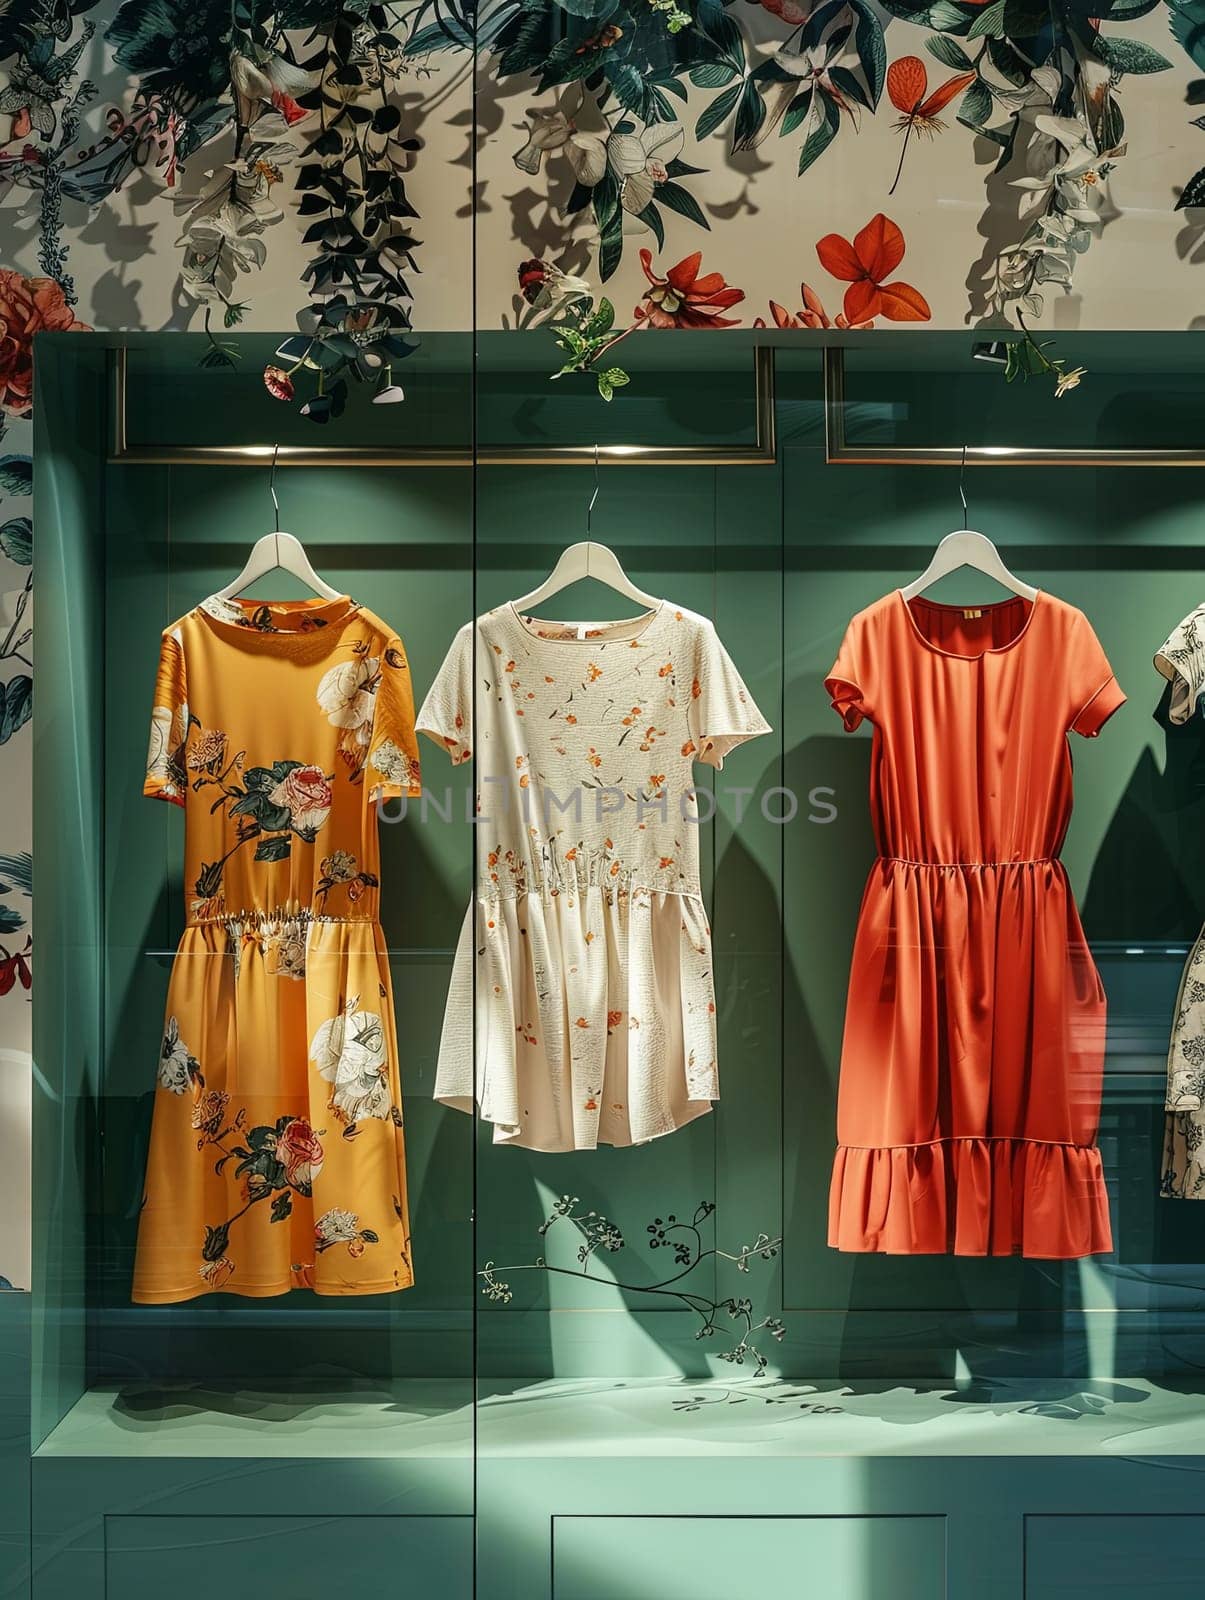 A display case showcasing a variety of dresses and shirts on hangers in a fashionable womens closet wallpaper setting.